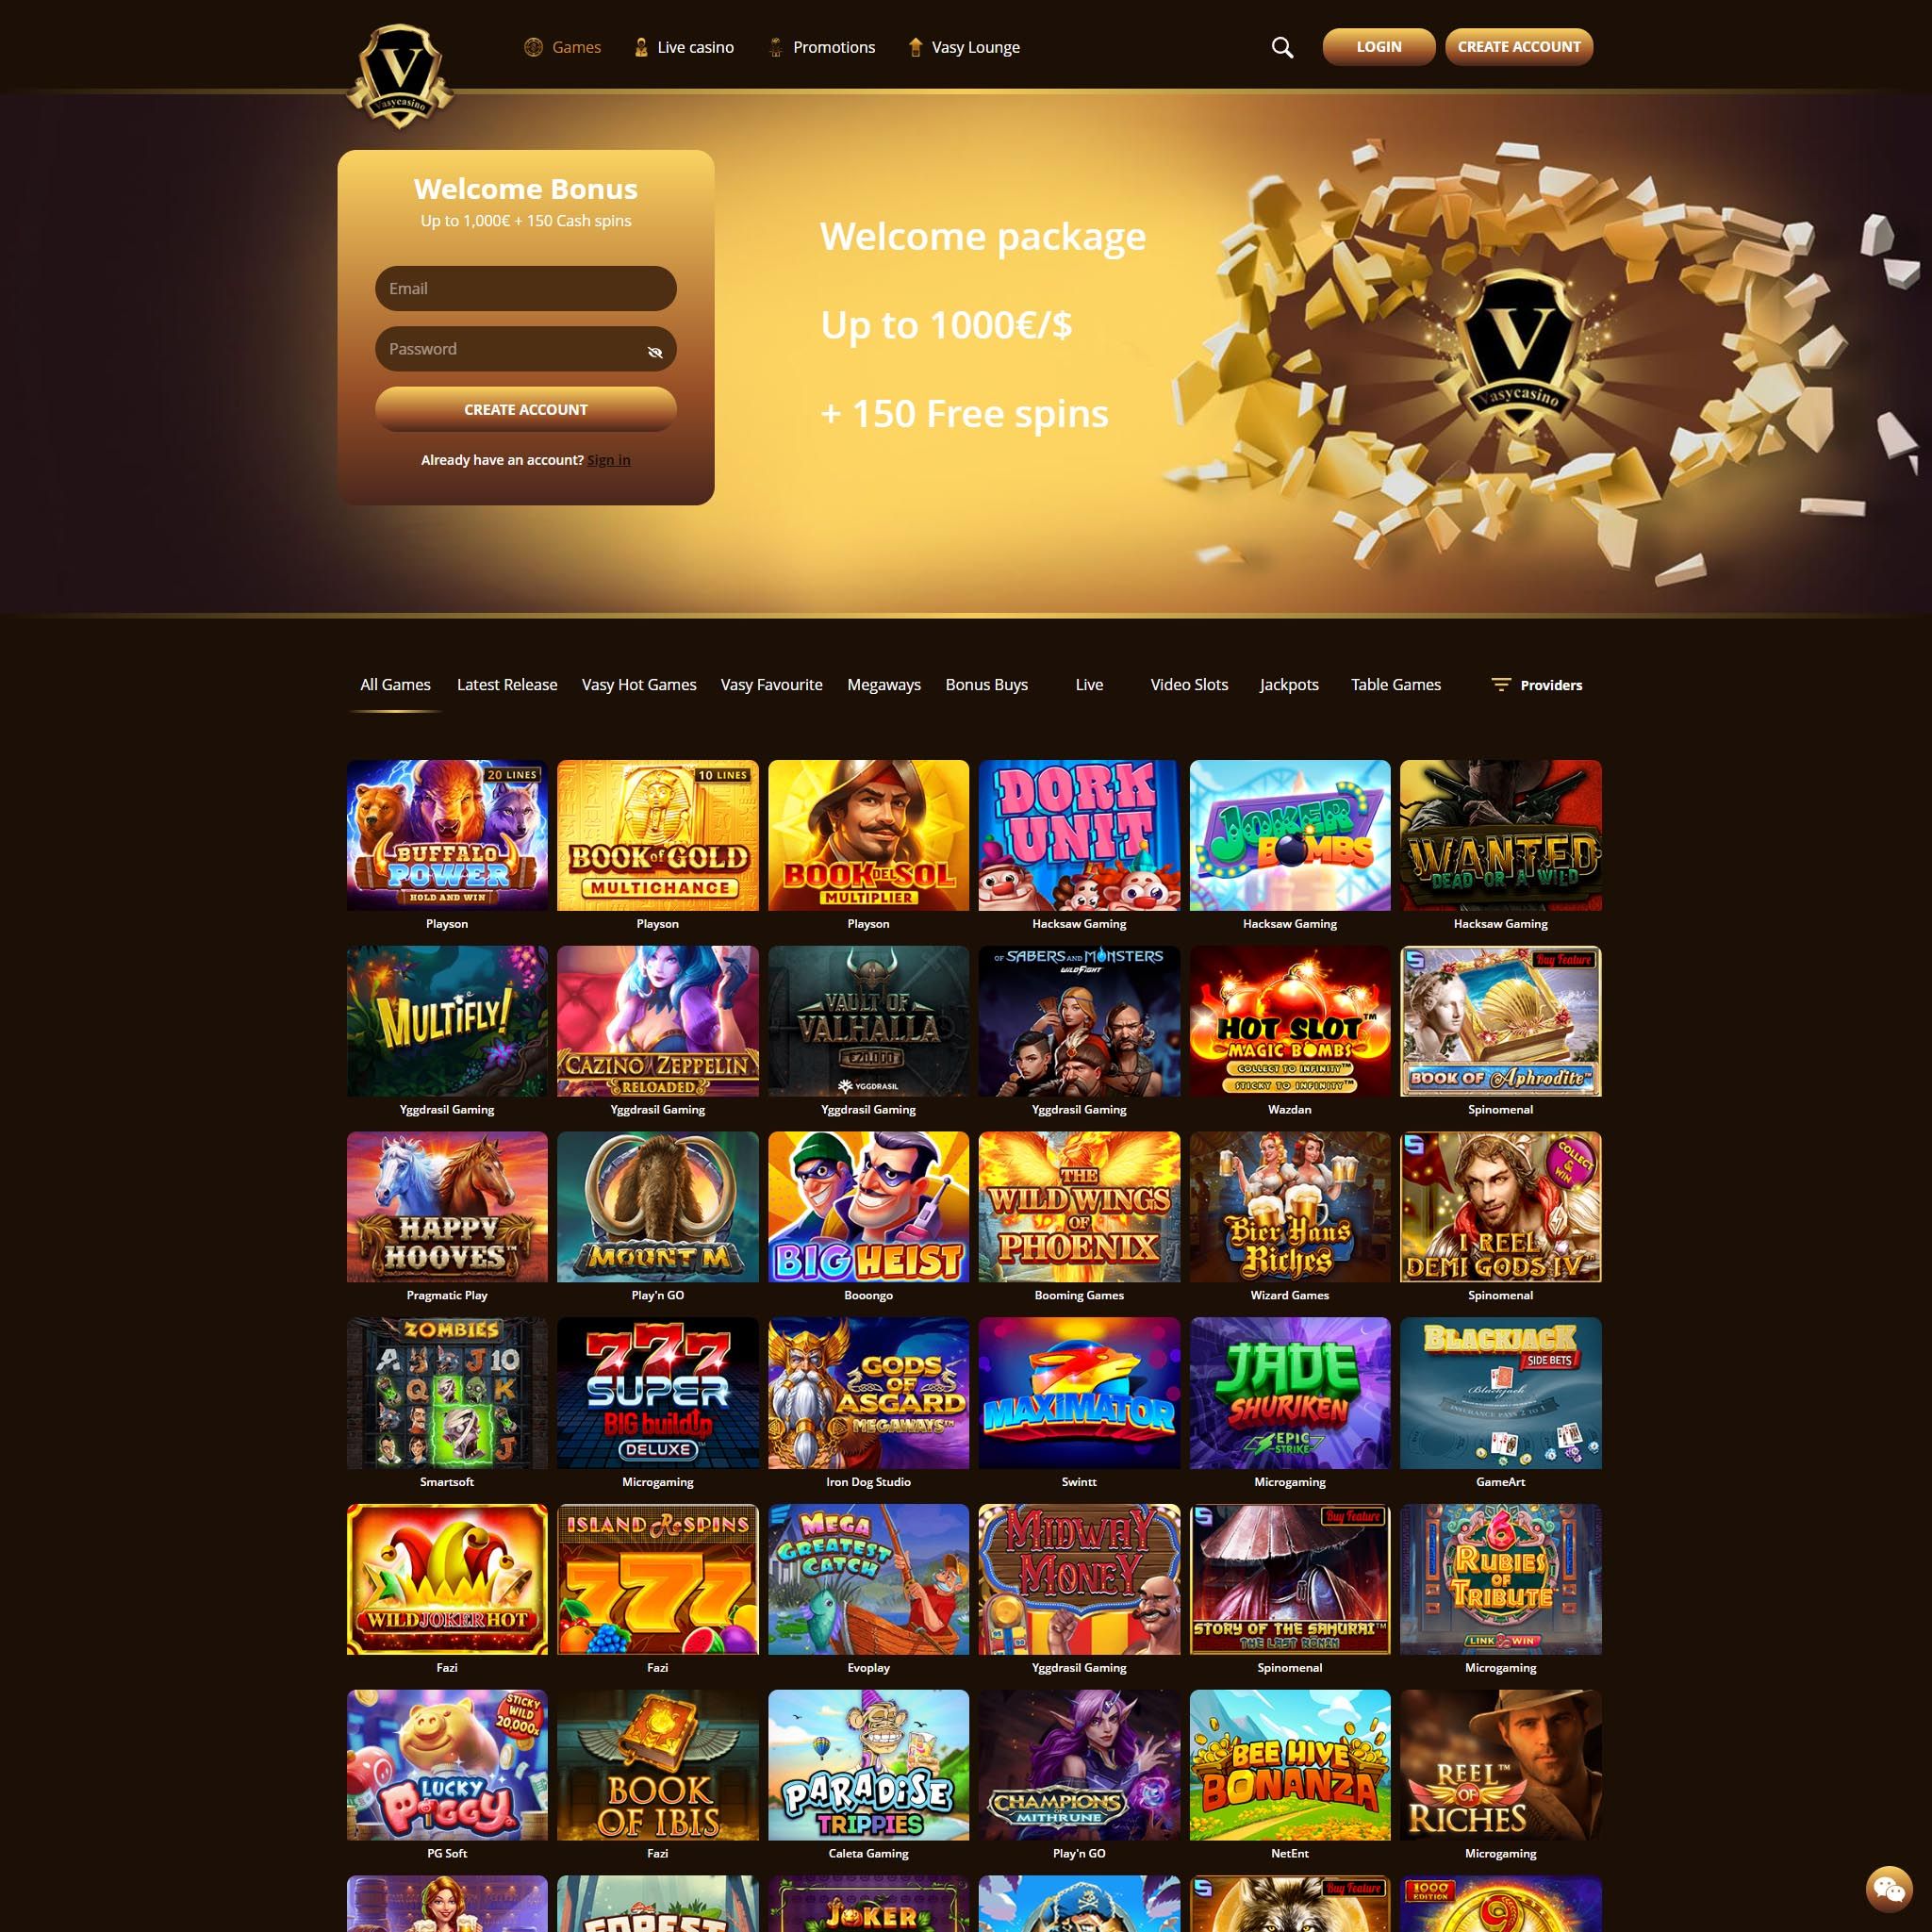 Vasy casino review by Mr. Gamble